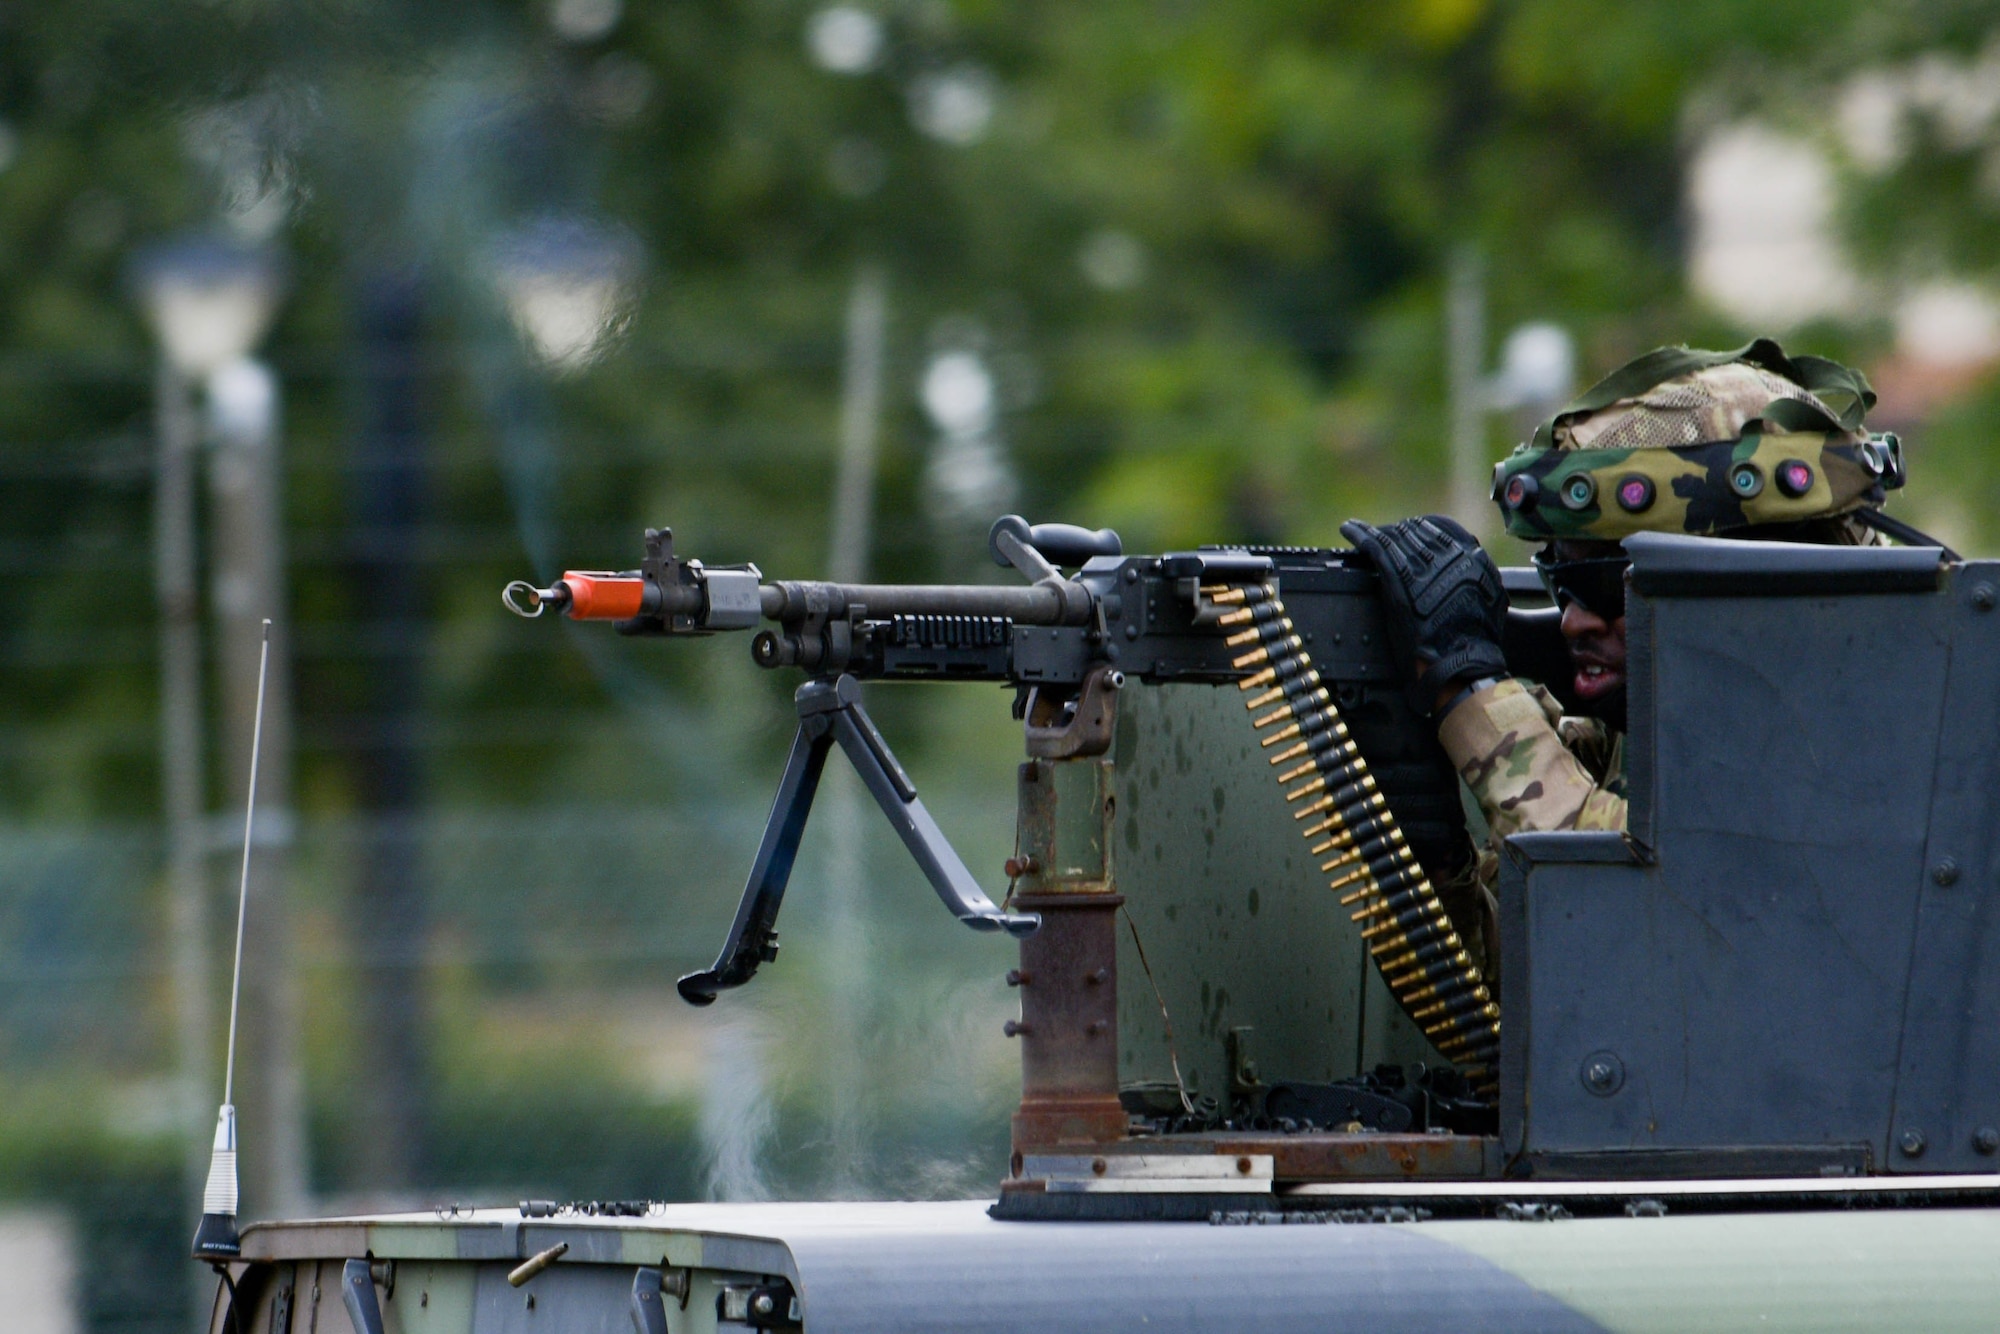 An Airman assigned to the 31st Security Forces Squadron shoots an M240 machine gun during exercise Steadfast Nomad (STND) 2021 at Aviano Air Base, Italy, Sept. 22, 2021. During the exercise, the 31st SFS trained to tactically respond to threats on Aviano and practiced responding with more personnel, weapons, and armored HHMWVs. (U.S. Air Force photo by Senior Airman Brooke Moeder)